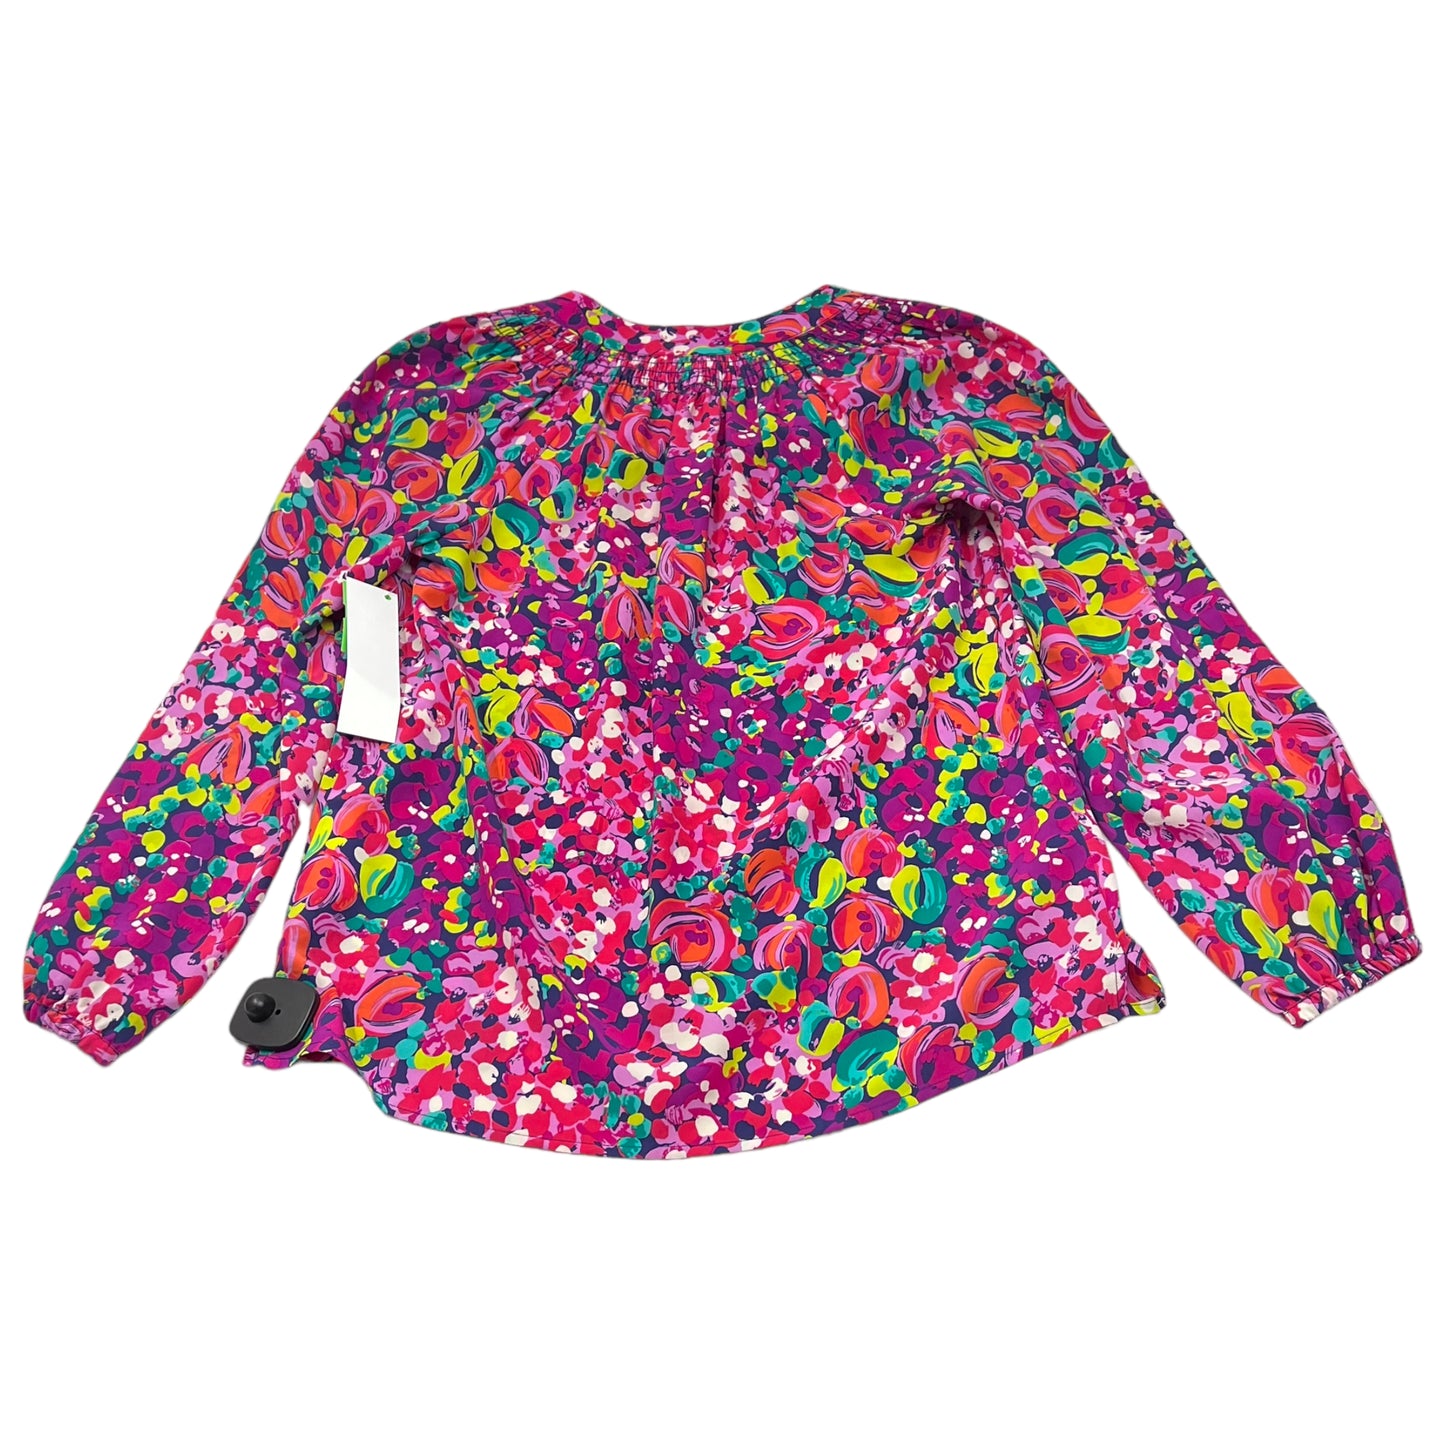 Top Long Sleeve Designer By Lilly Pulitzer  Size: Xxs